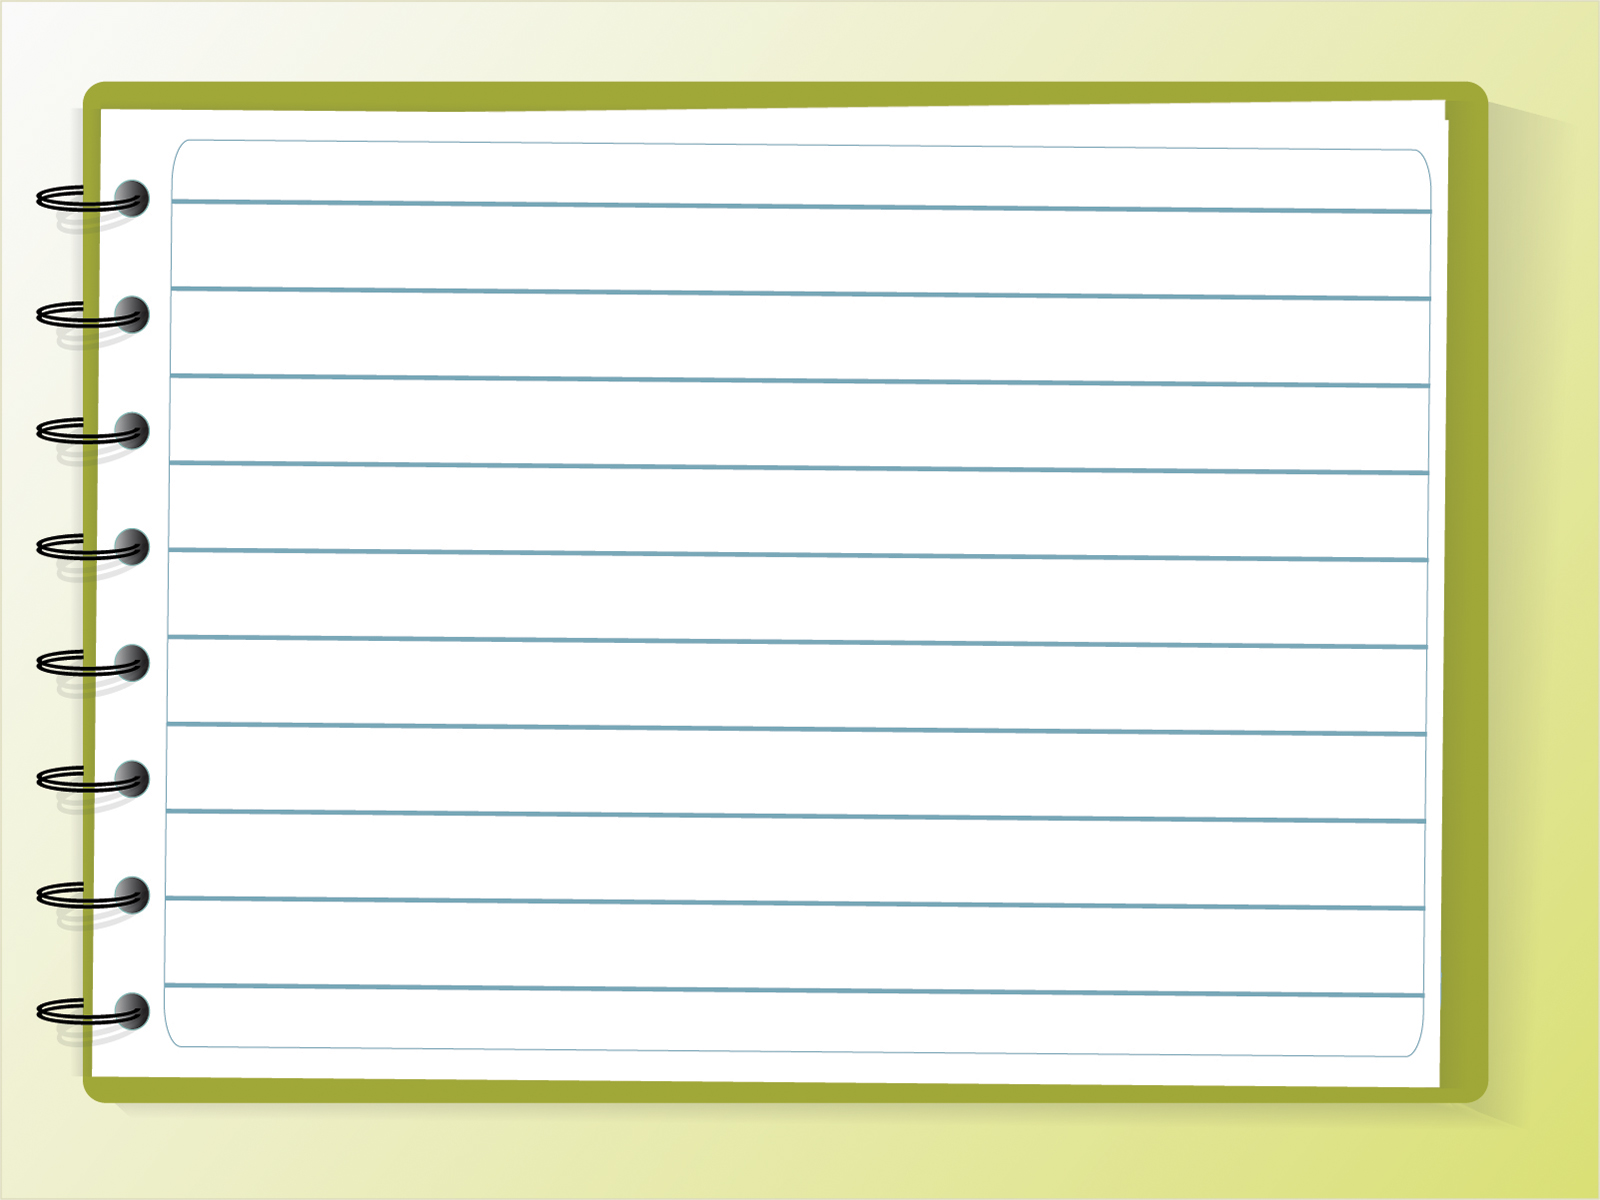 lined paper background for powerpoint